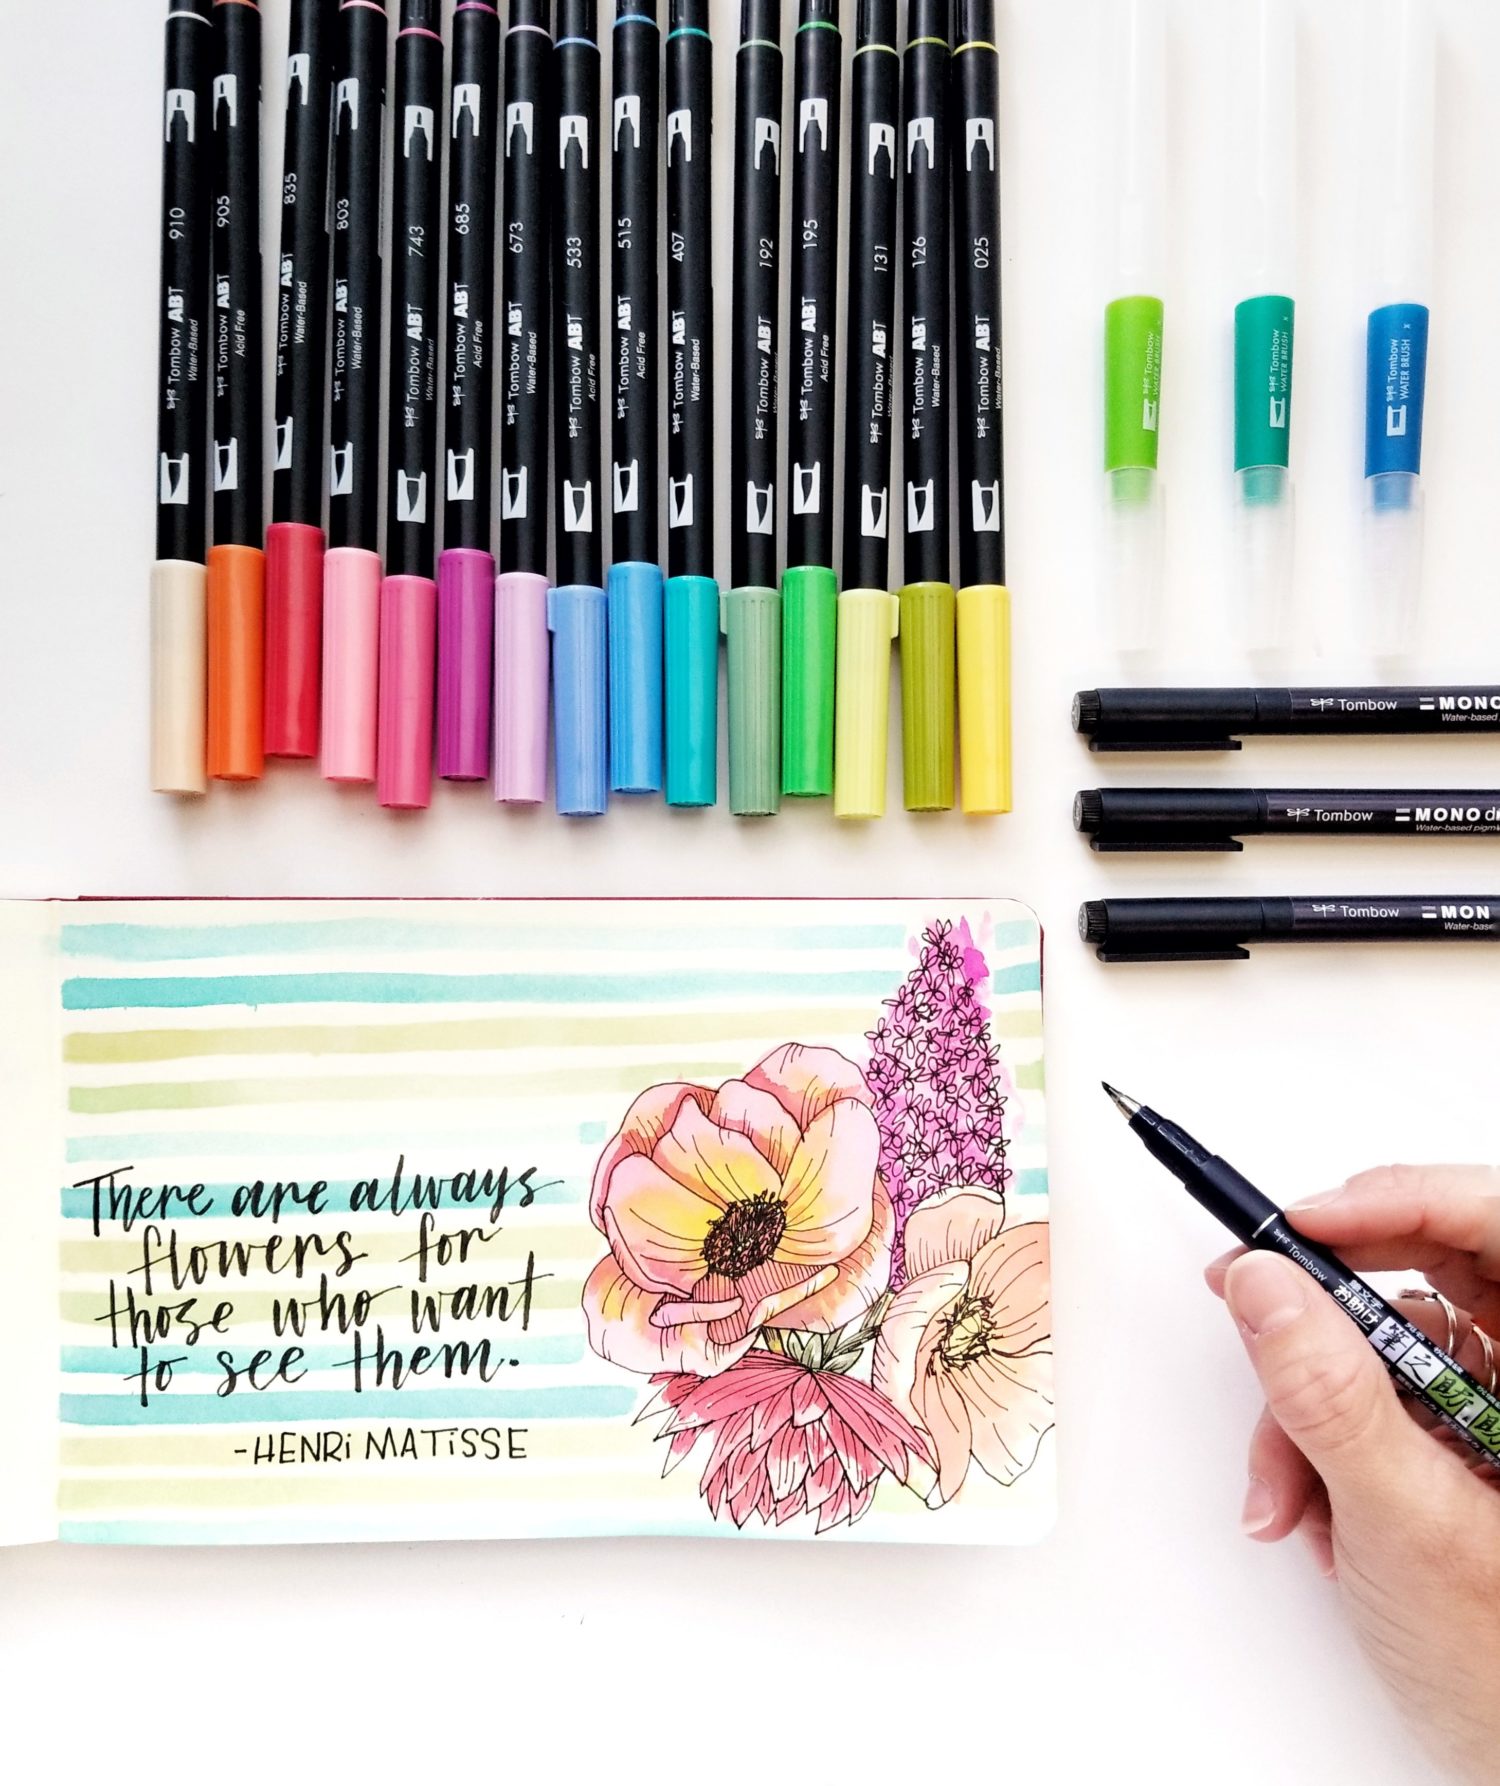 The Best Tombow Products for Your Journals - Tombow USA Blog